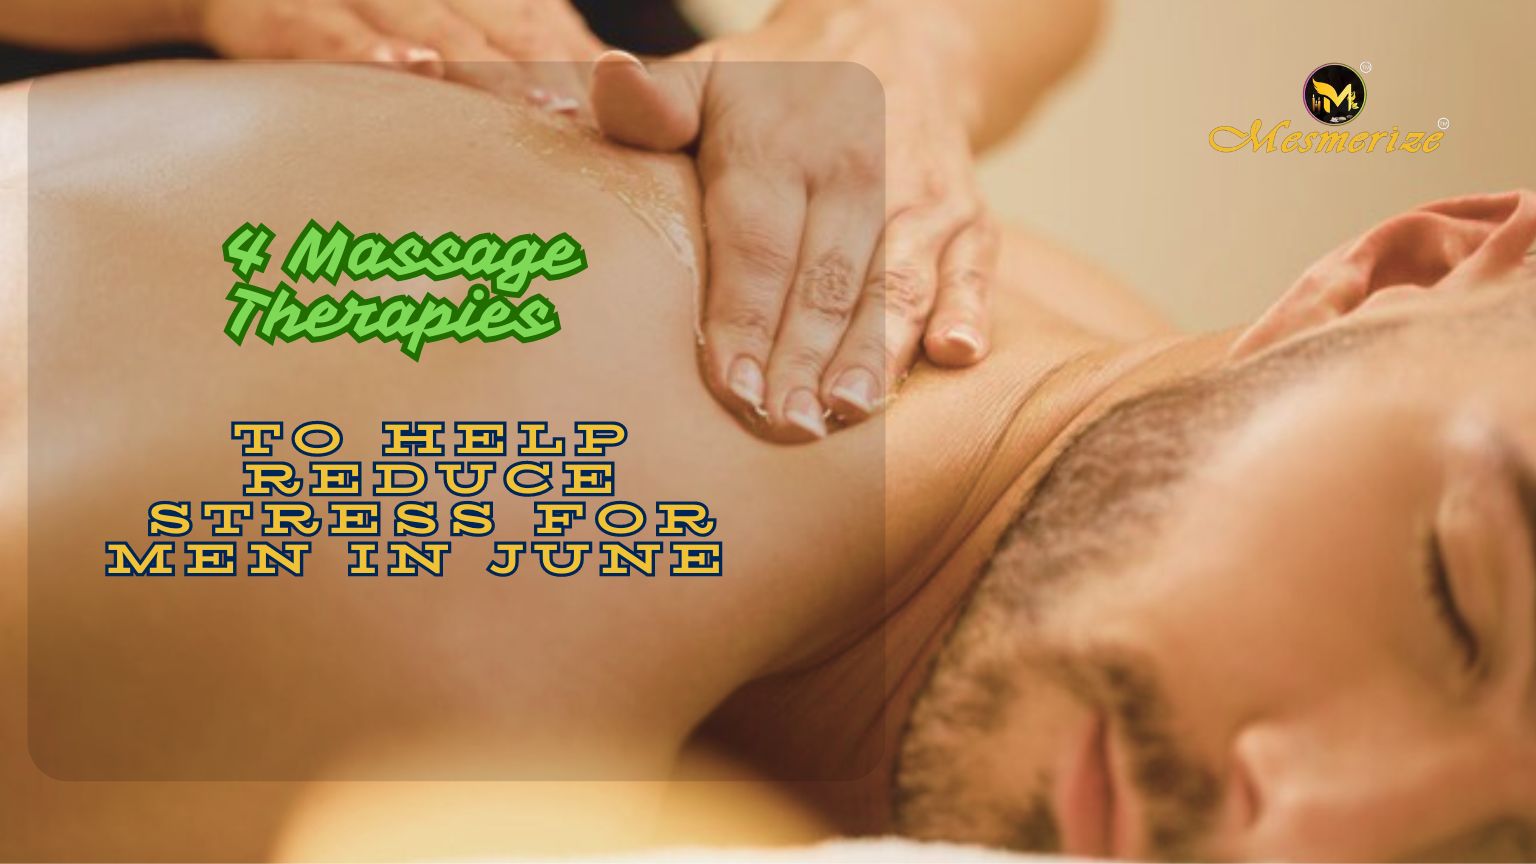 Read more about the article Top 4 Massage Therapies to Help Reduce Stress for Men in June